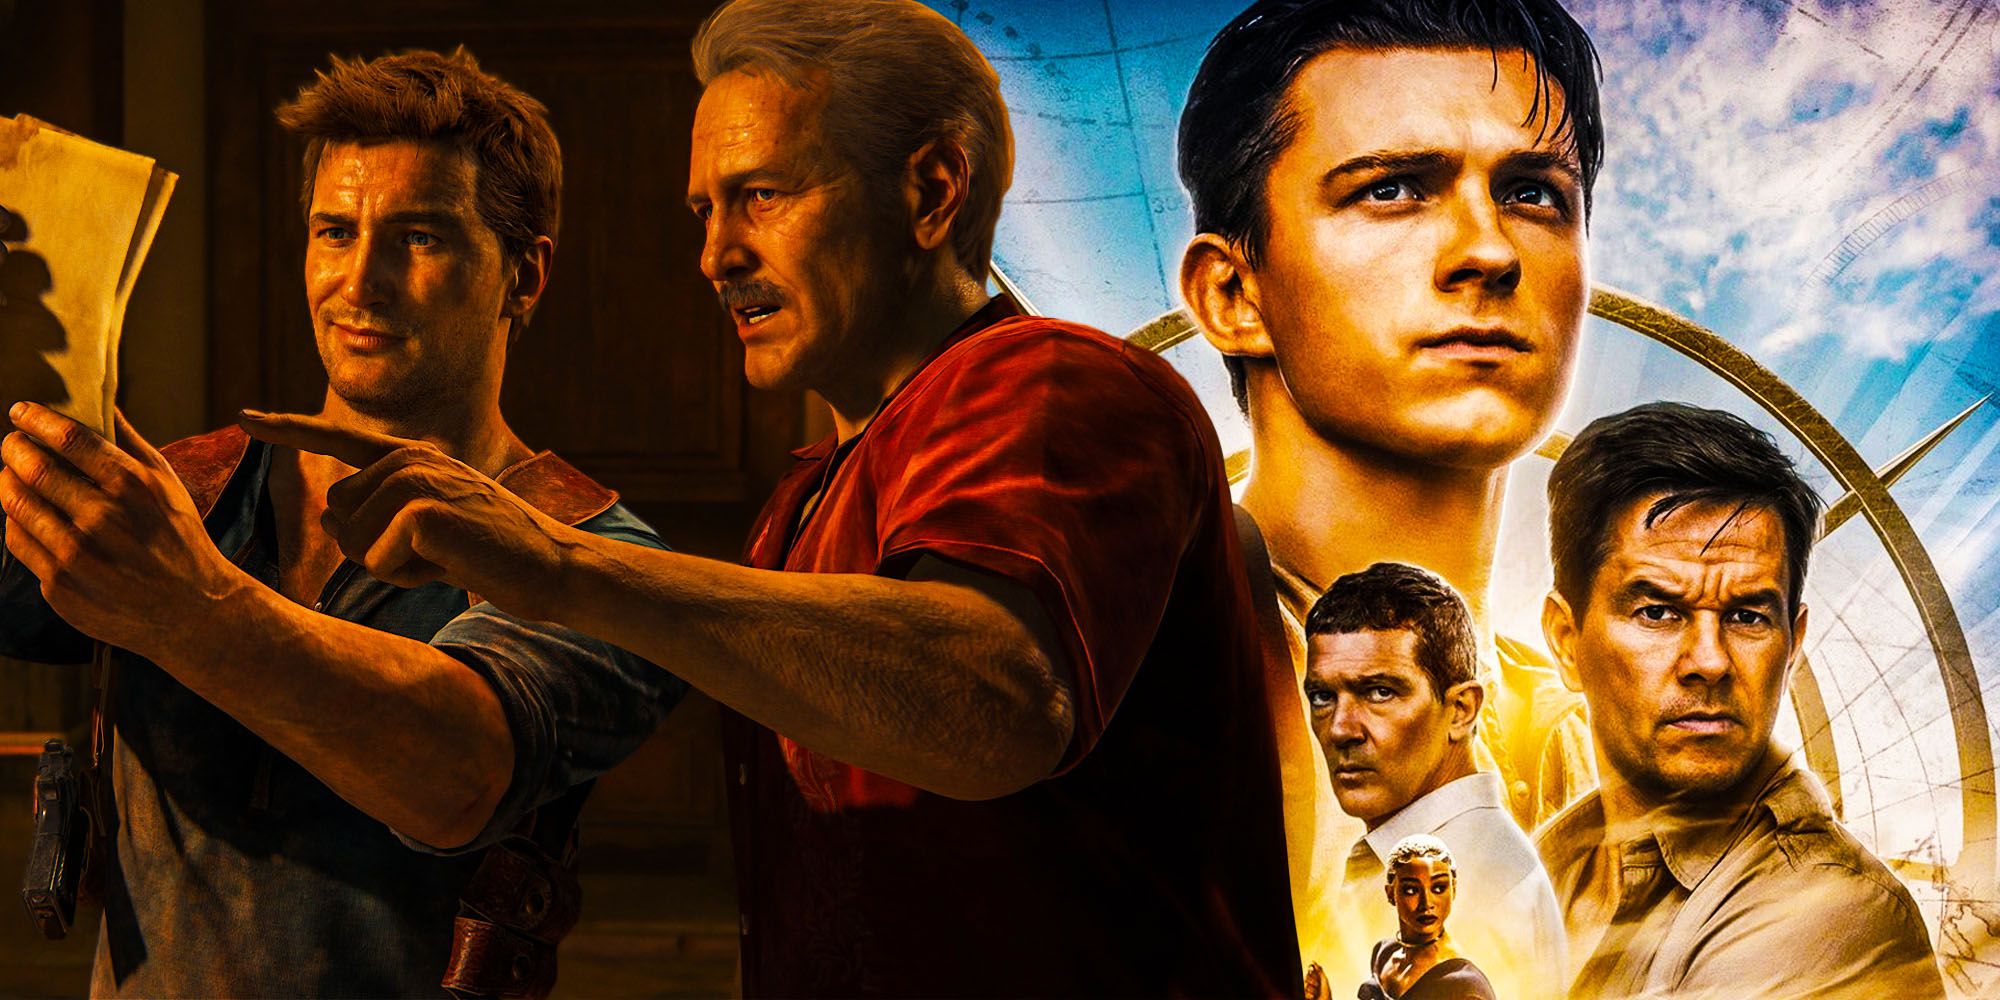 Uncharted 2 Can Rescue 0 Million Movie Franchise With Divisive 16-Year-Old Video Game Plot Twist